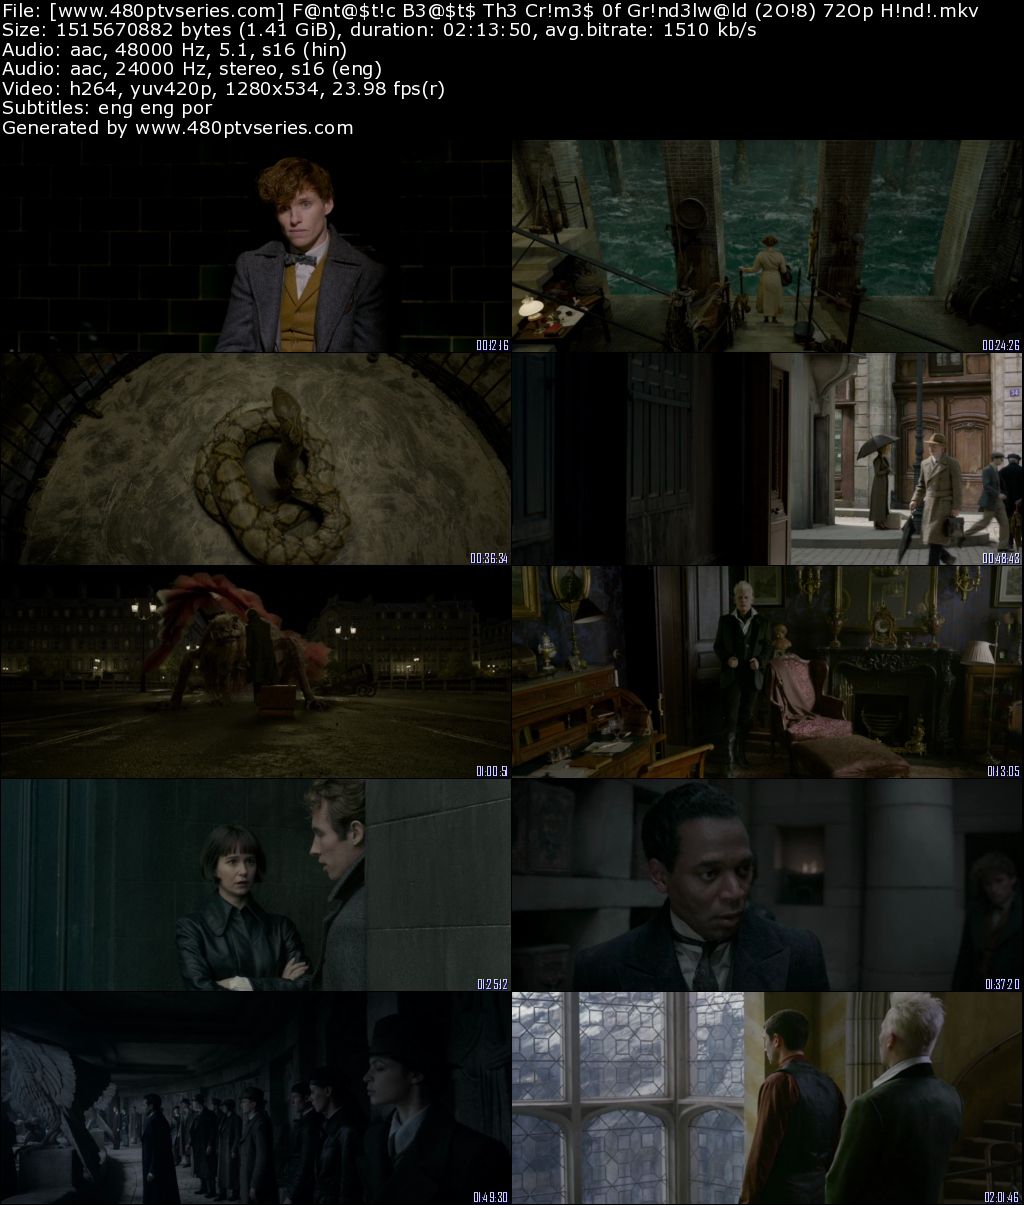 Download Fantastic Beasts The Crimes of Grindelwald 2018 Full Movie Hindi Download Dual Audio 720p Bluray Free Watch Online Full Movie Download Worldfree4u 9xmovies